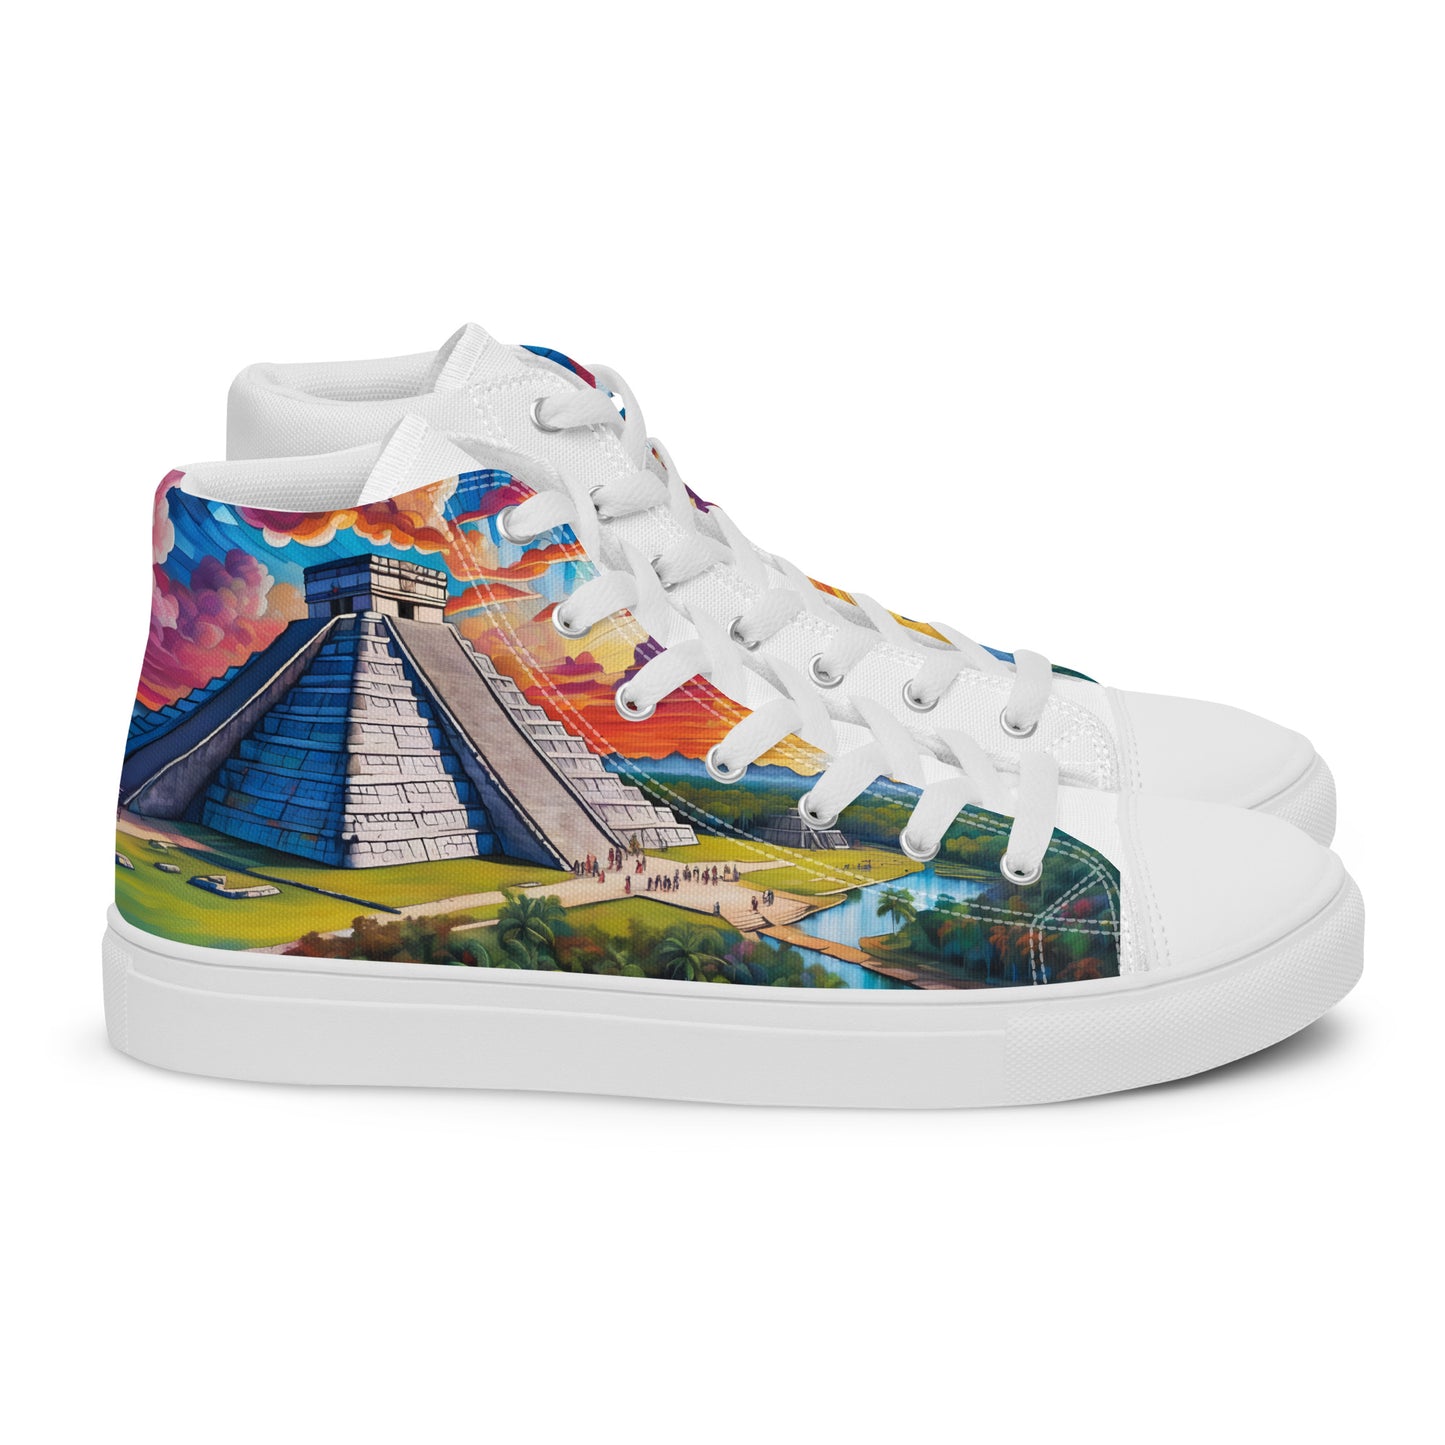 Chichén Itzá - Stained glass - Women - White - High top shoes